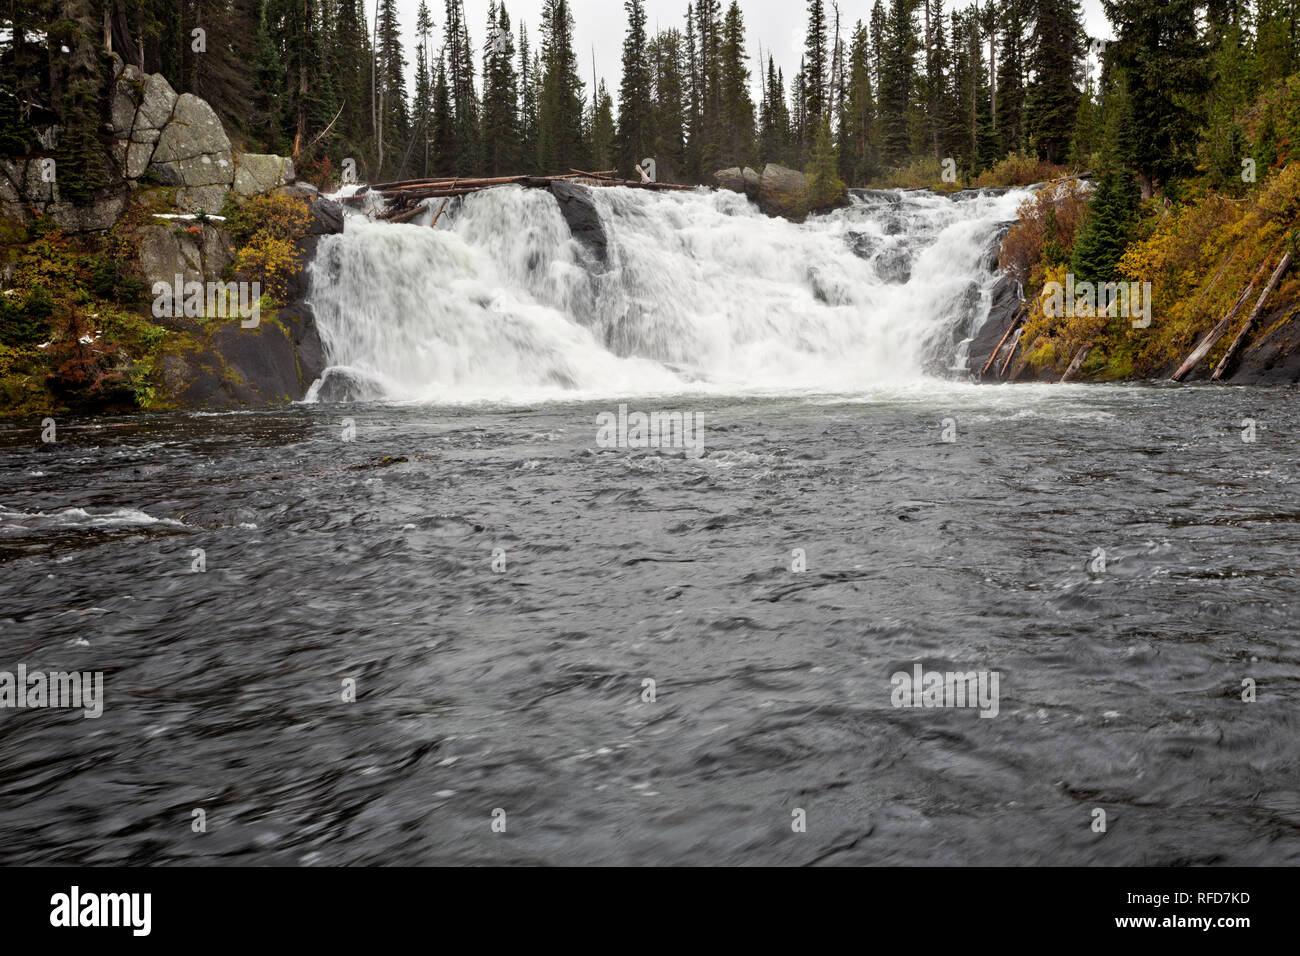 WY02936-00...WYOMING - Lewis Falls on the Lewis River in Yellowstone National Park. Stock Photo